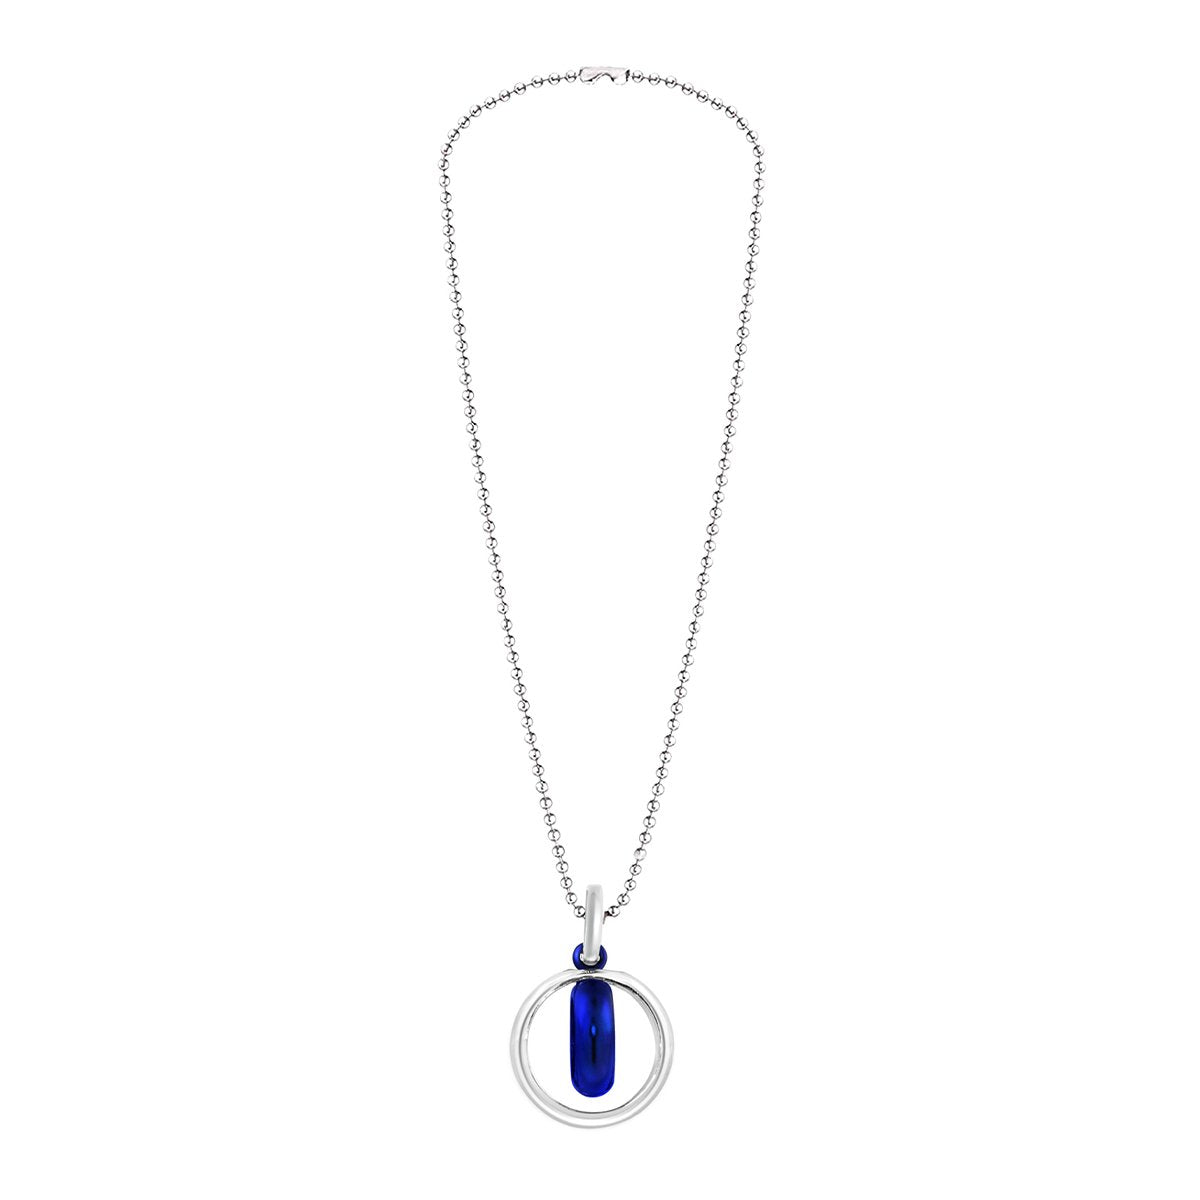 Dual Inside Ring Stainless Steel Blue Silver Pendant Chain Necklace